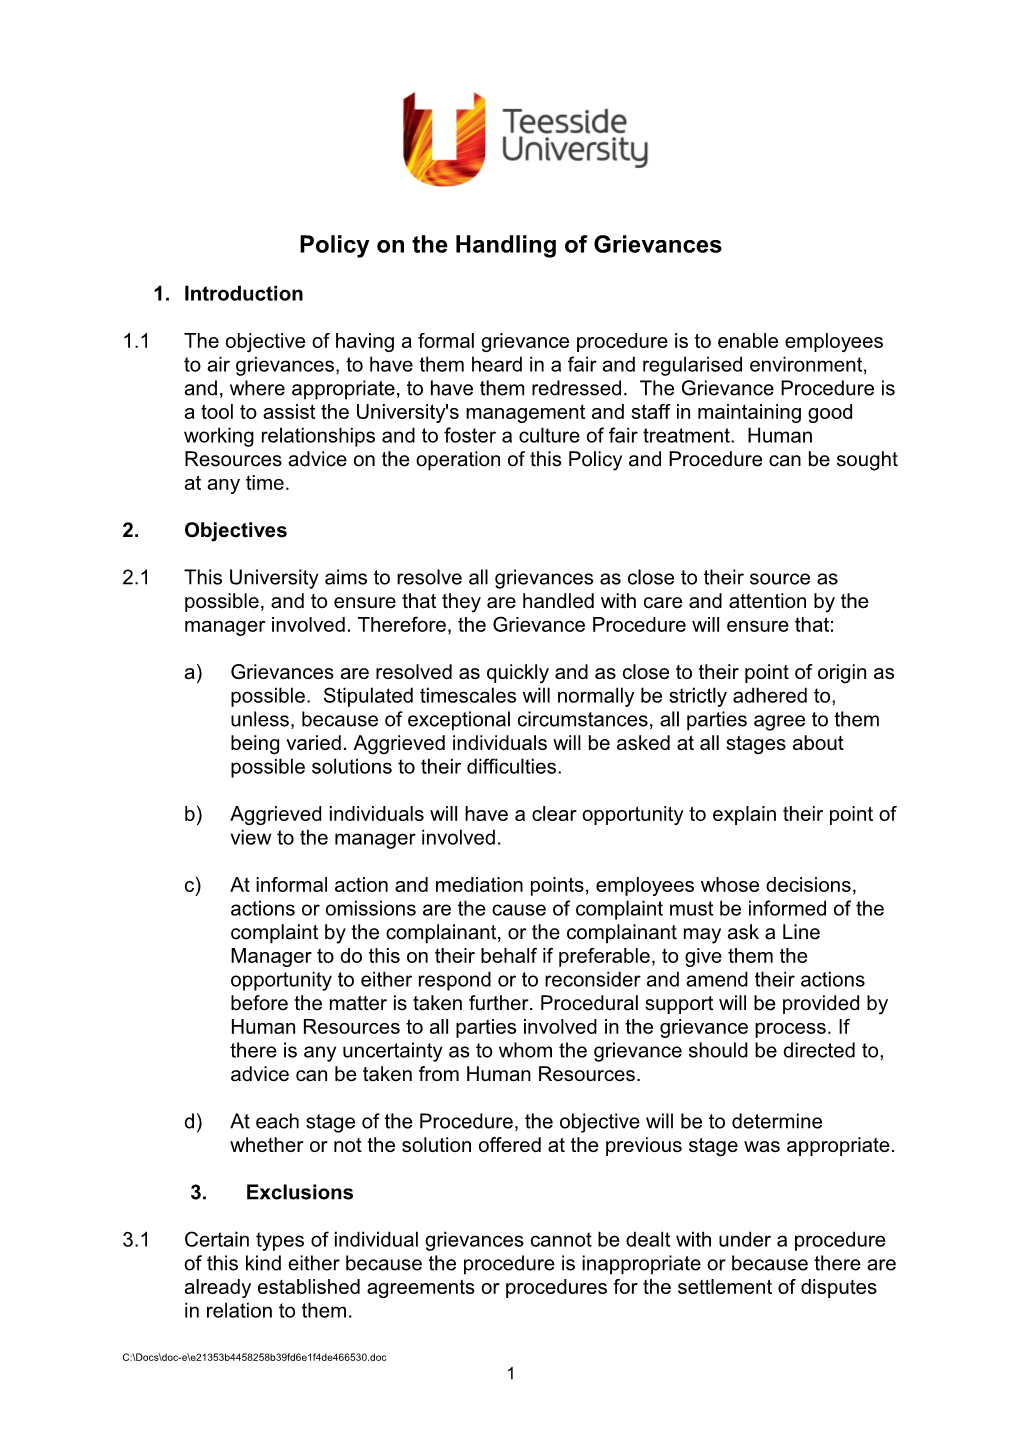 Policy on the Handling of Grievances